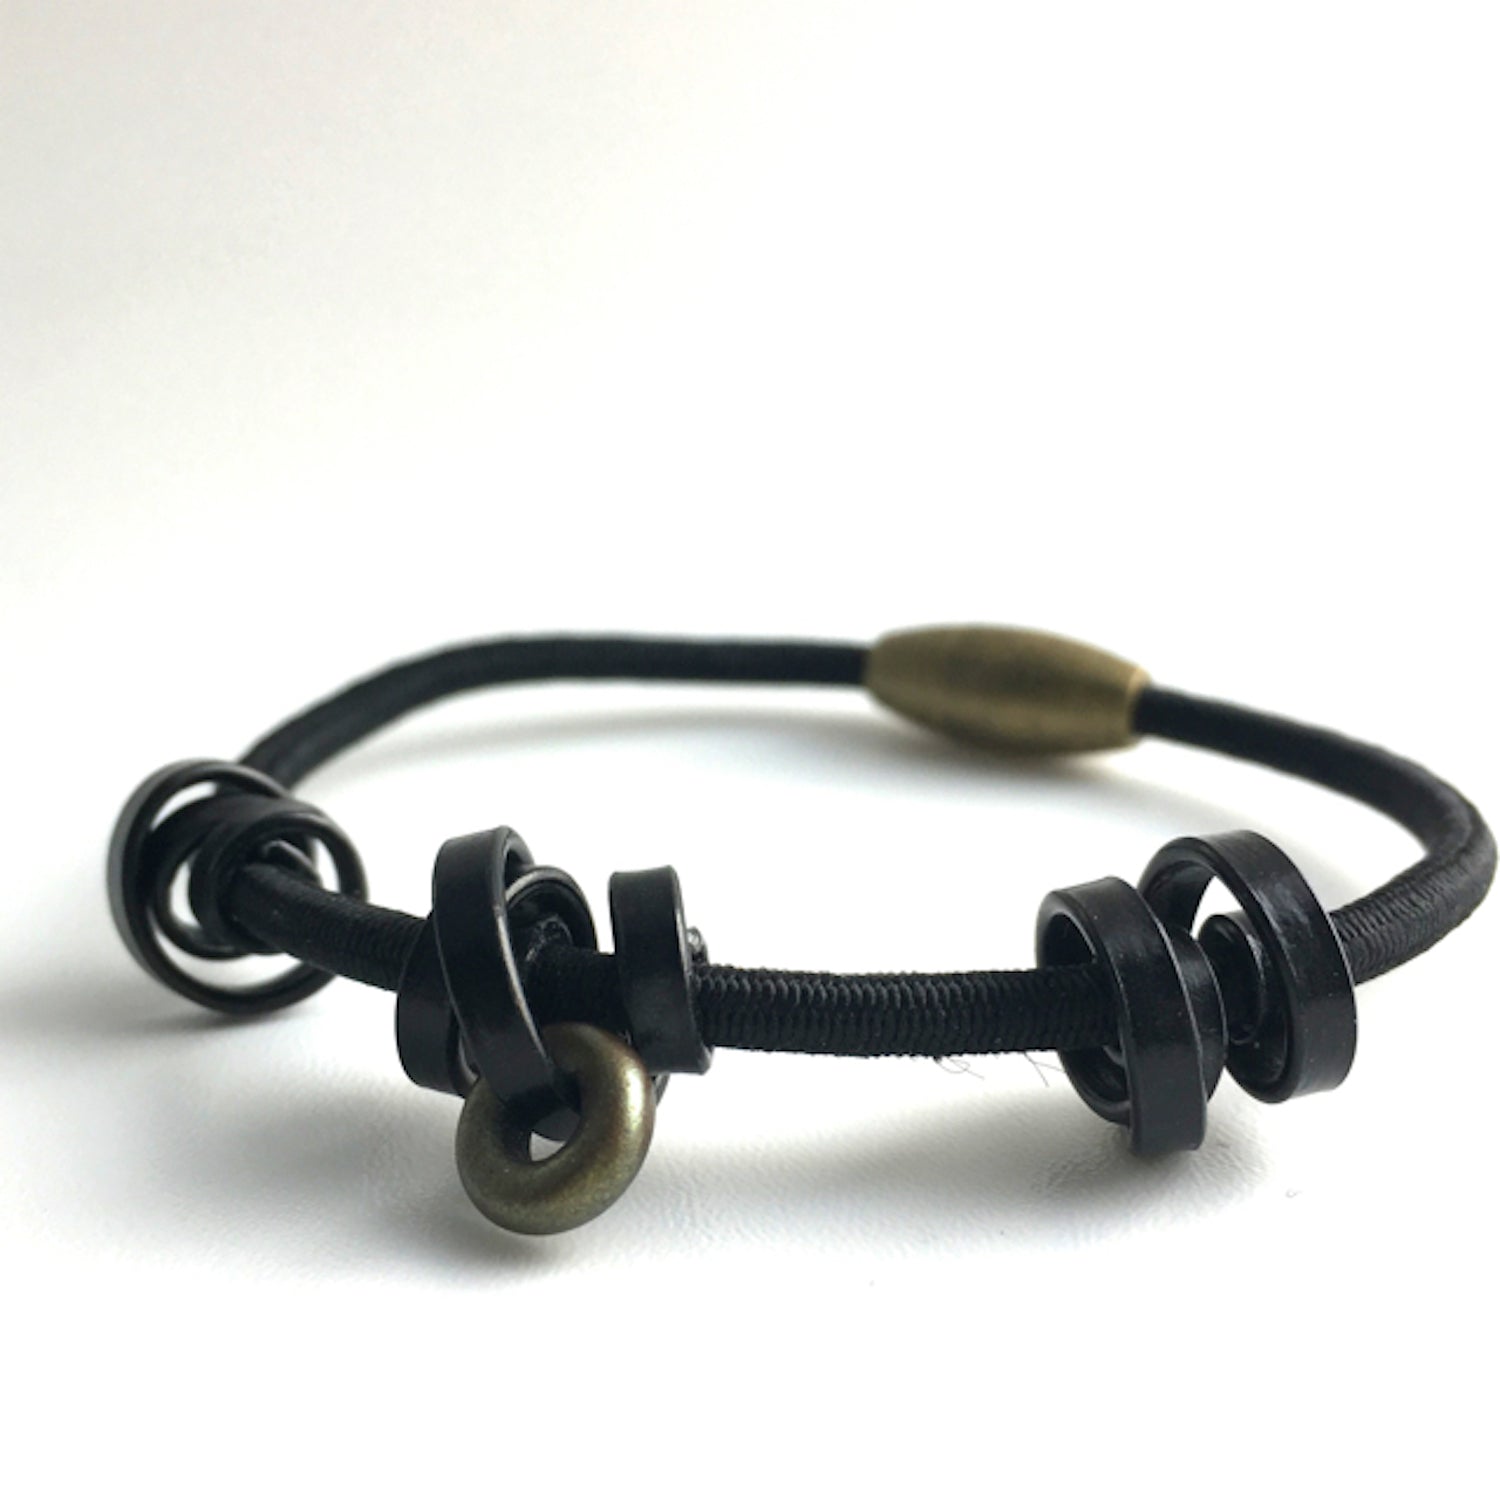 This is a Loopt bracelet on a fine cord and thin black coloured aluminum wire. All bracelets sport magnetic clasps.